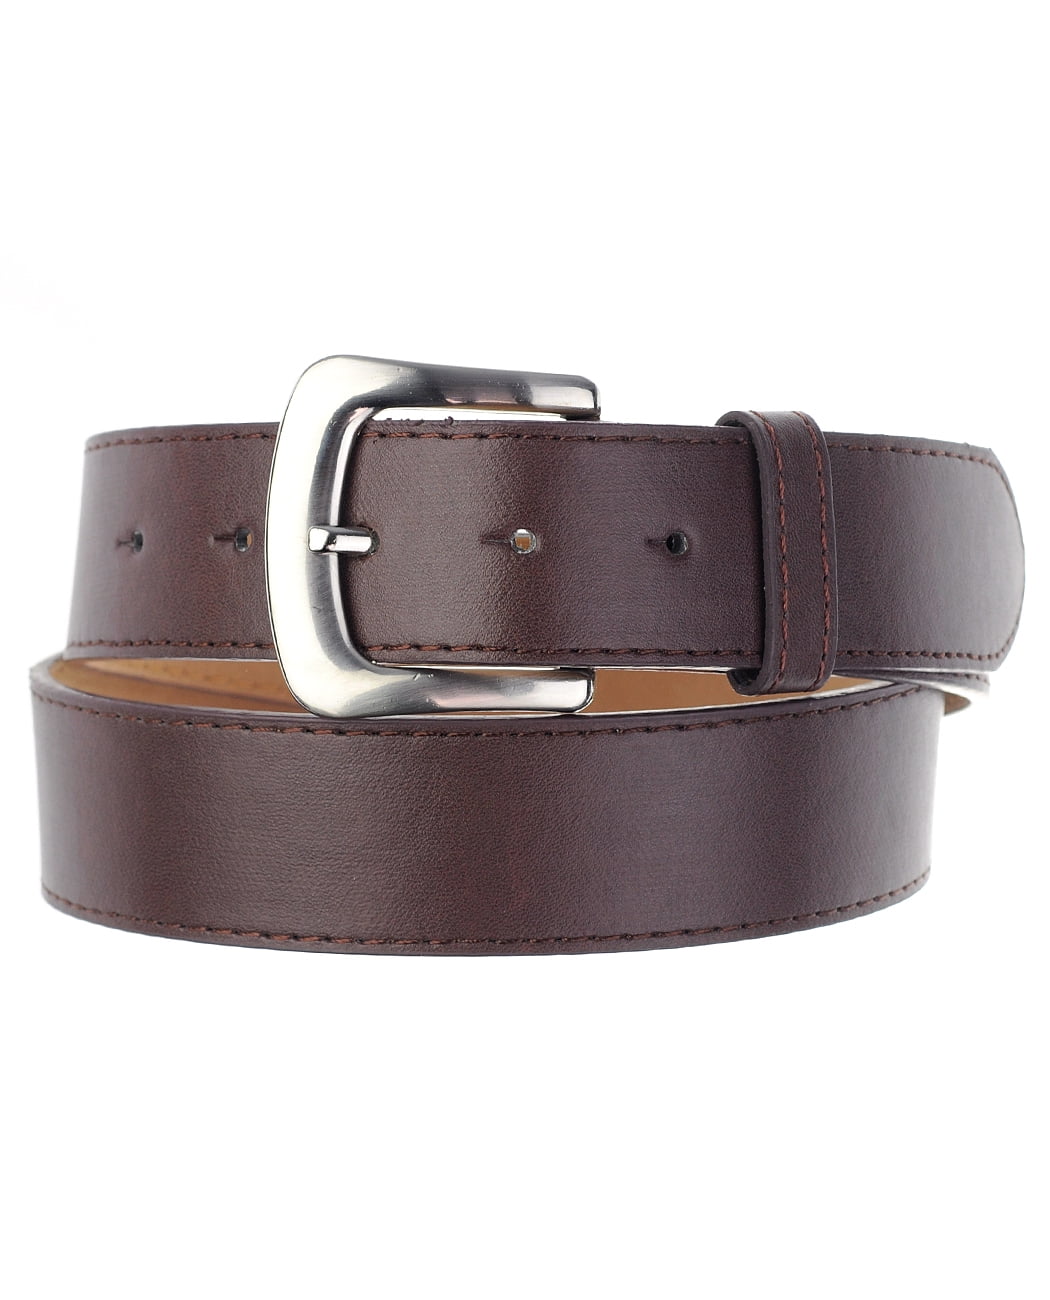 NYFASHION101 - Womens Thick Wide Stitched Leather Belt - MAP019A ...